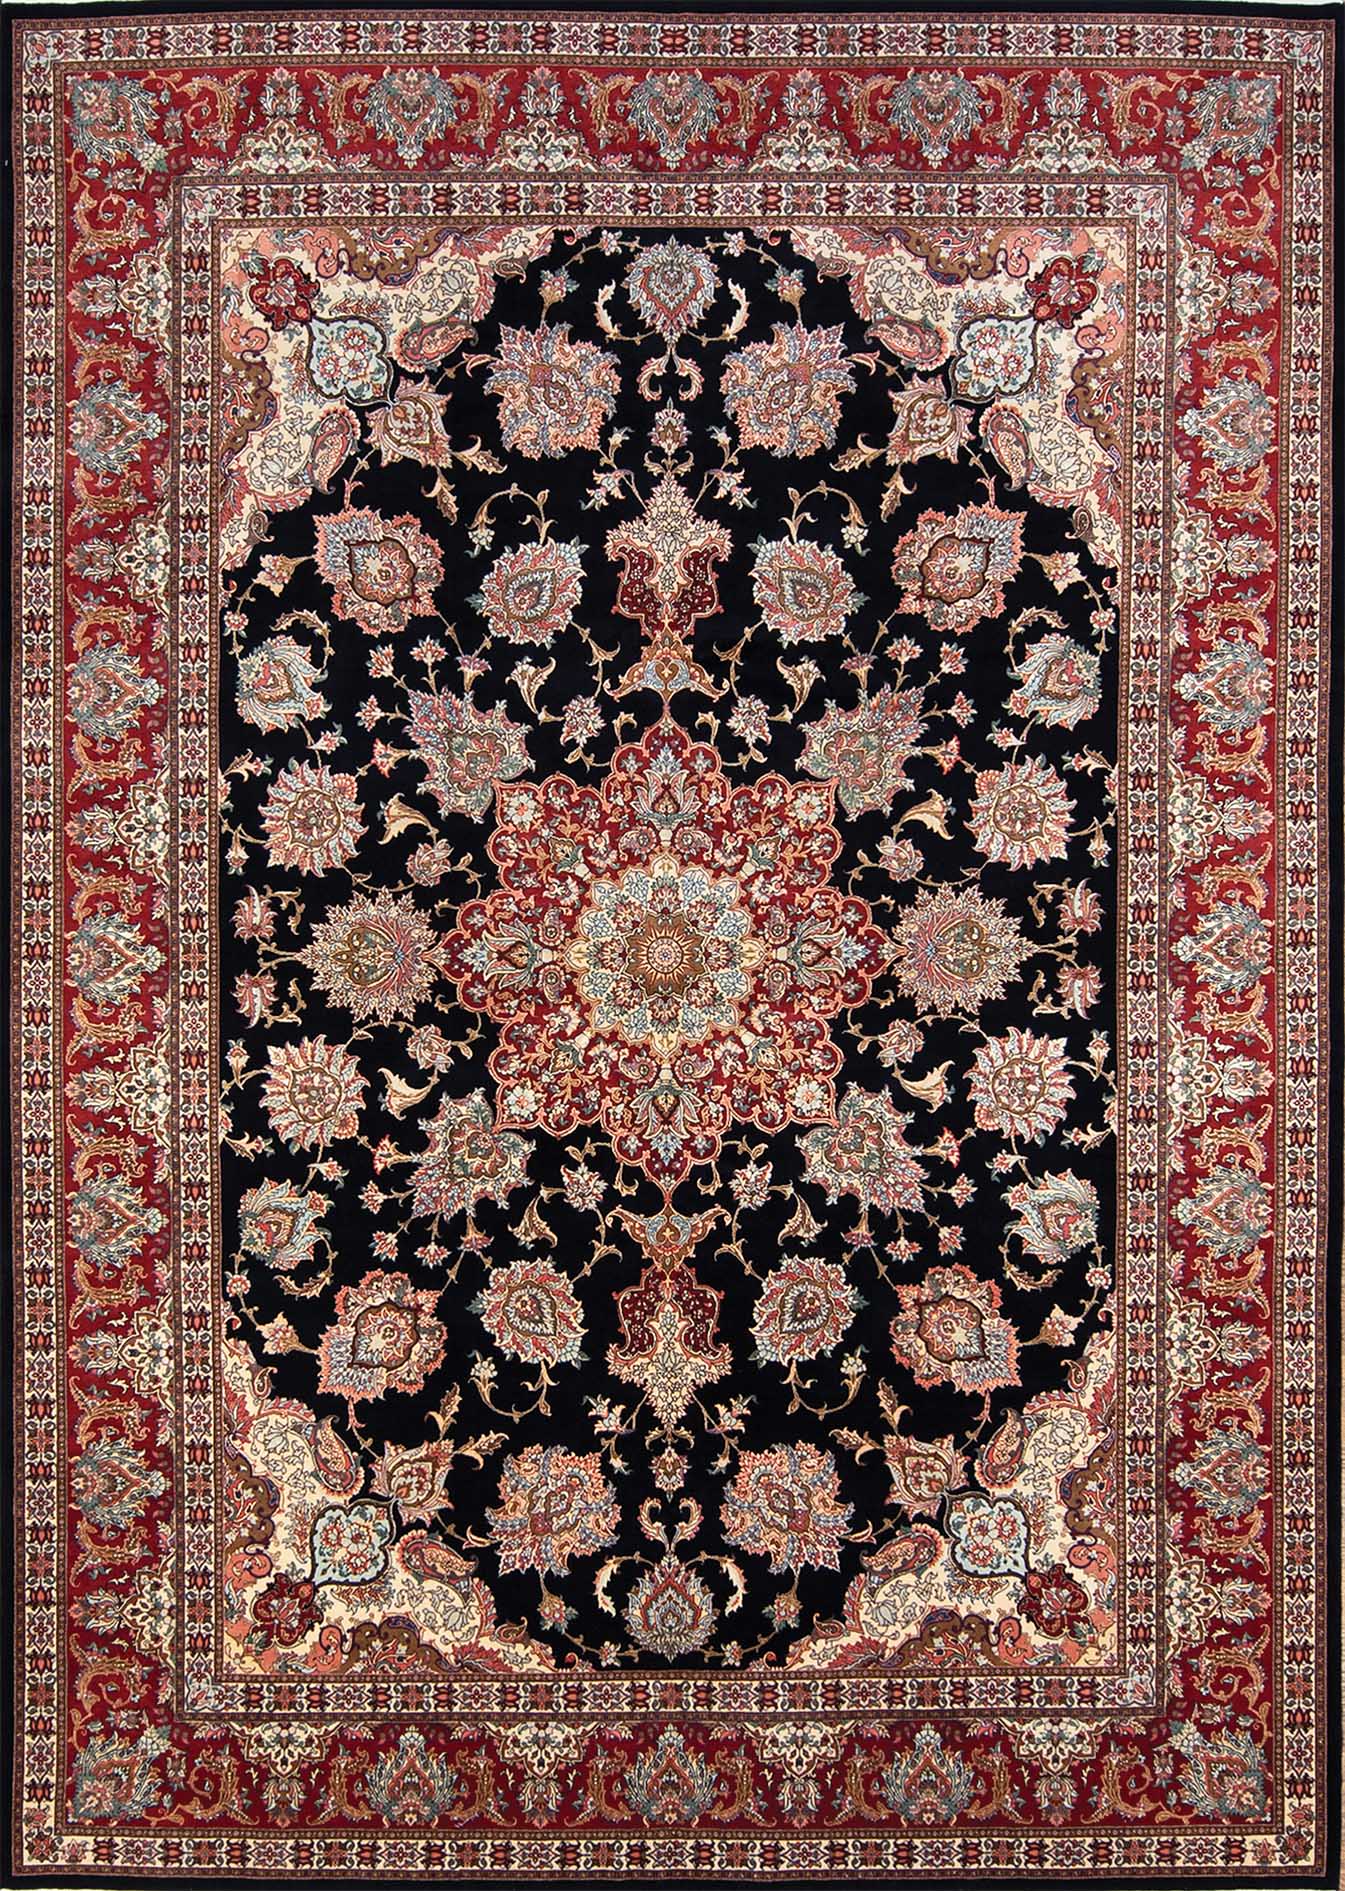 Family room rug. Persian Tabriz rug with black and red colors. Size 8.4x11.7.